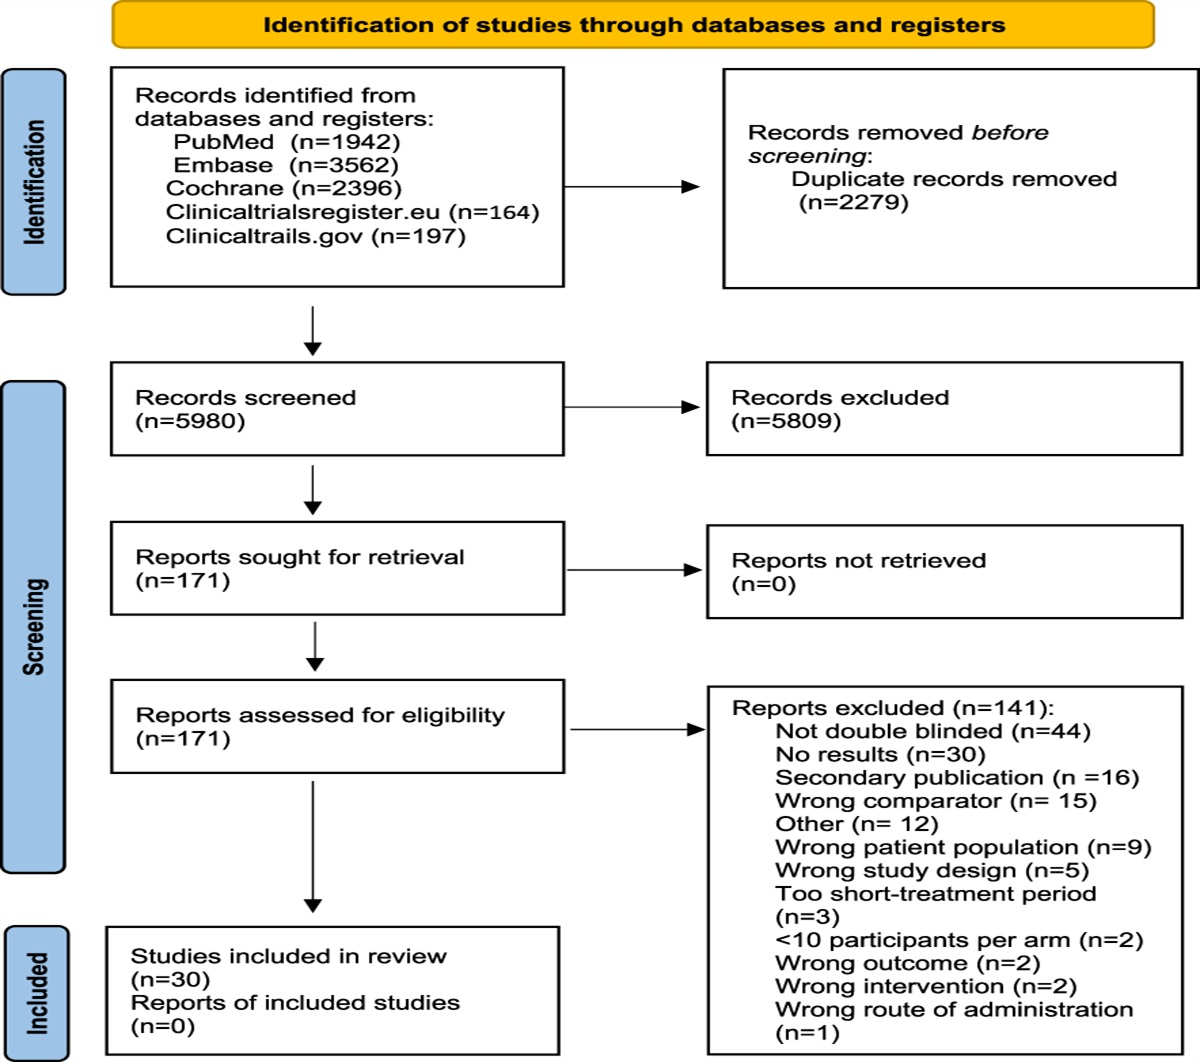 A systematic review and meta-analysis of randomized controlled head-to-head trials of recommended drugs for neuropathic pain